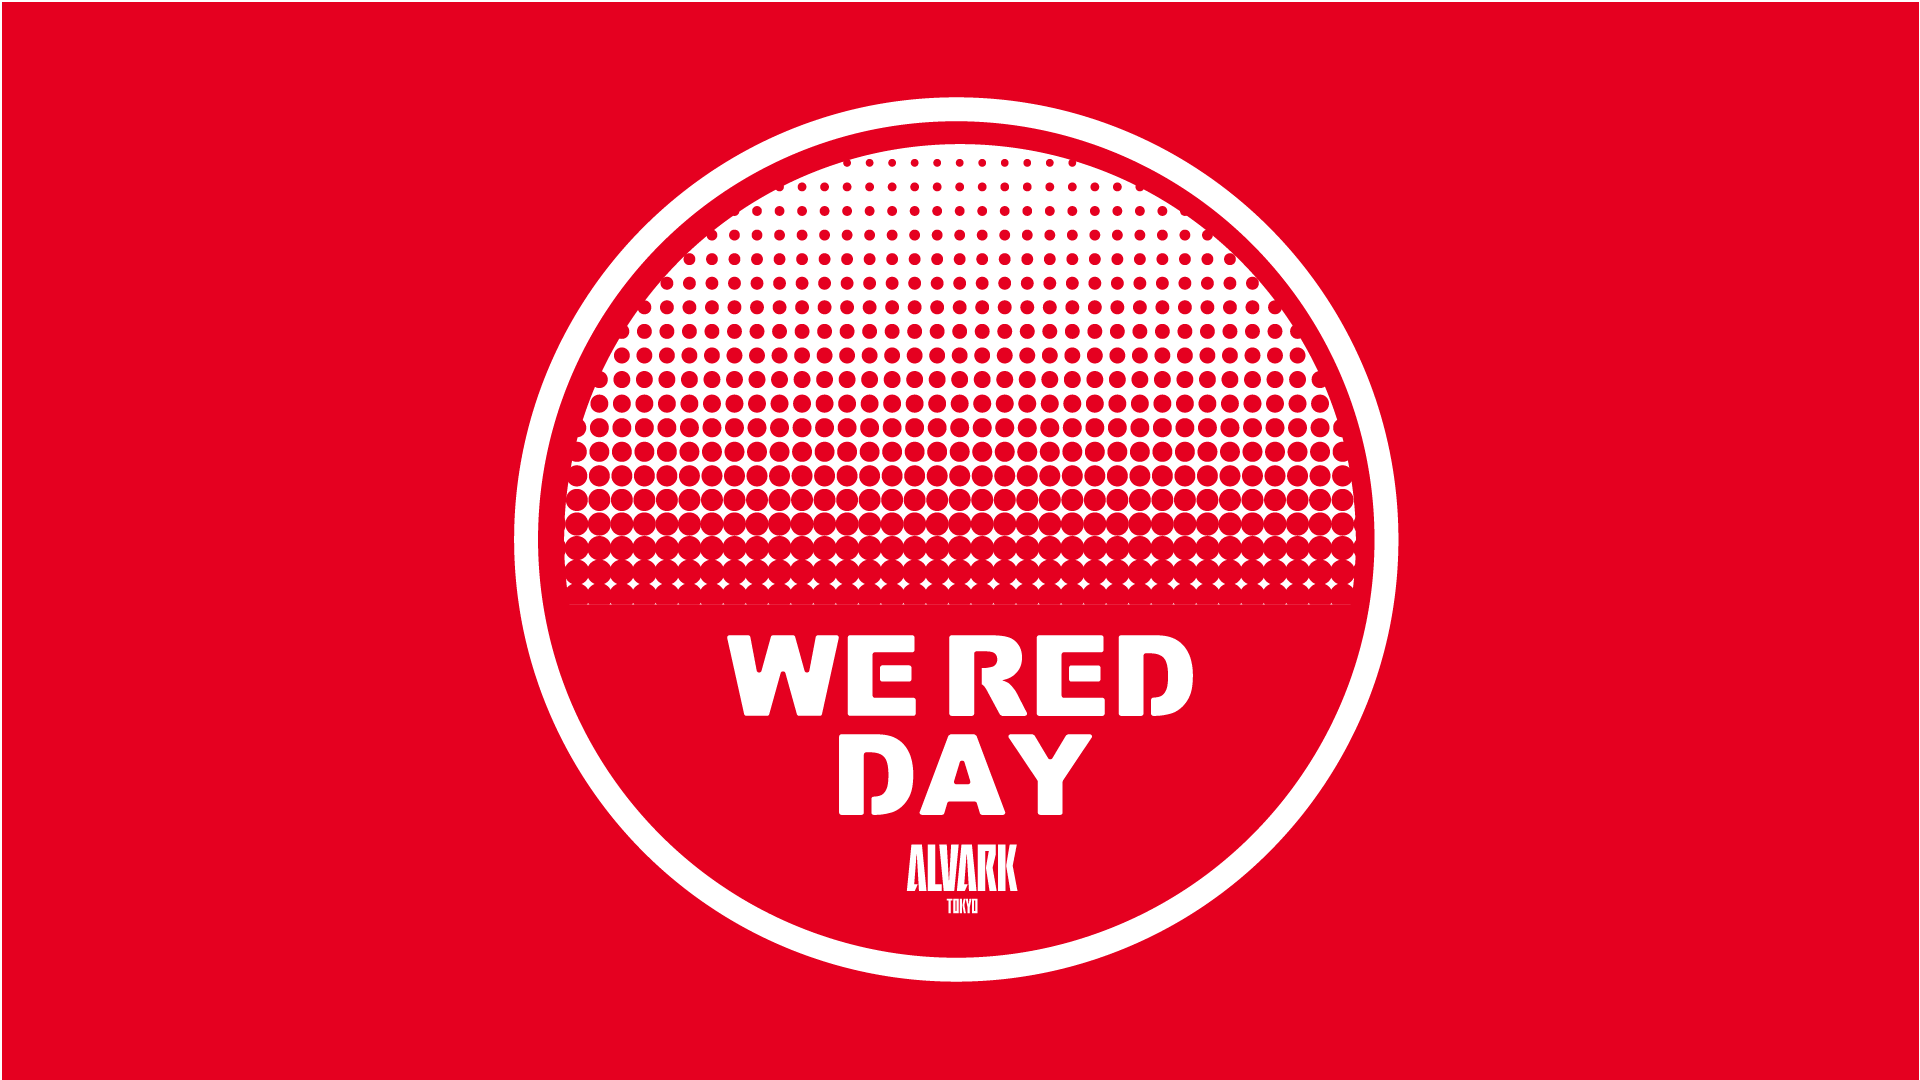 WE RED DAY